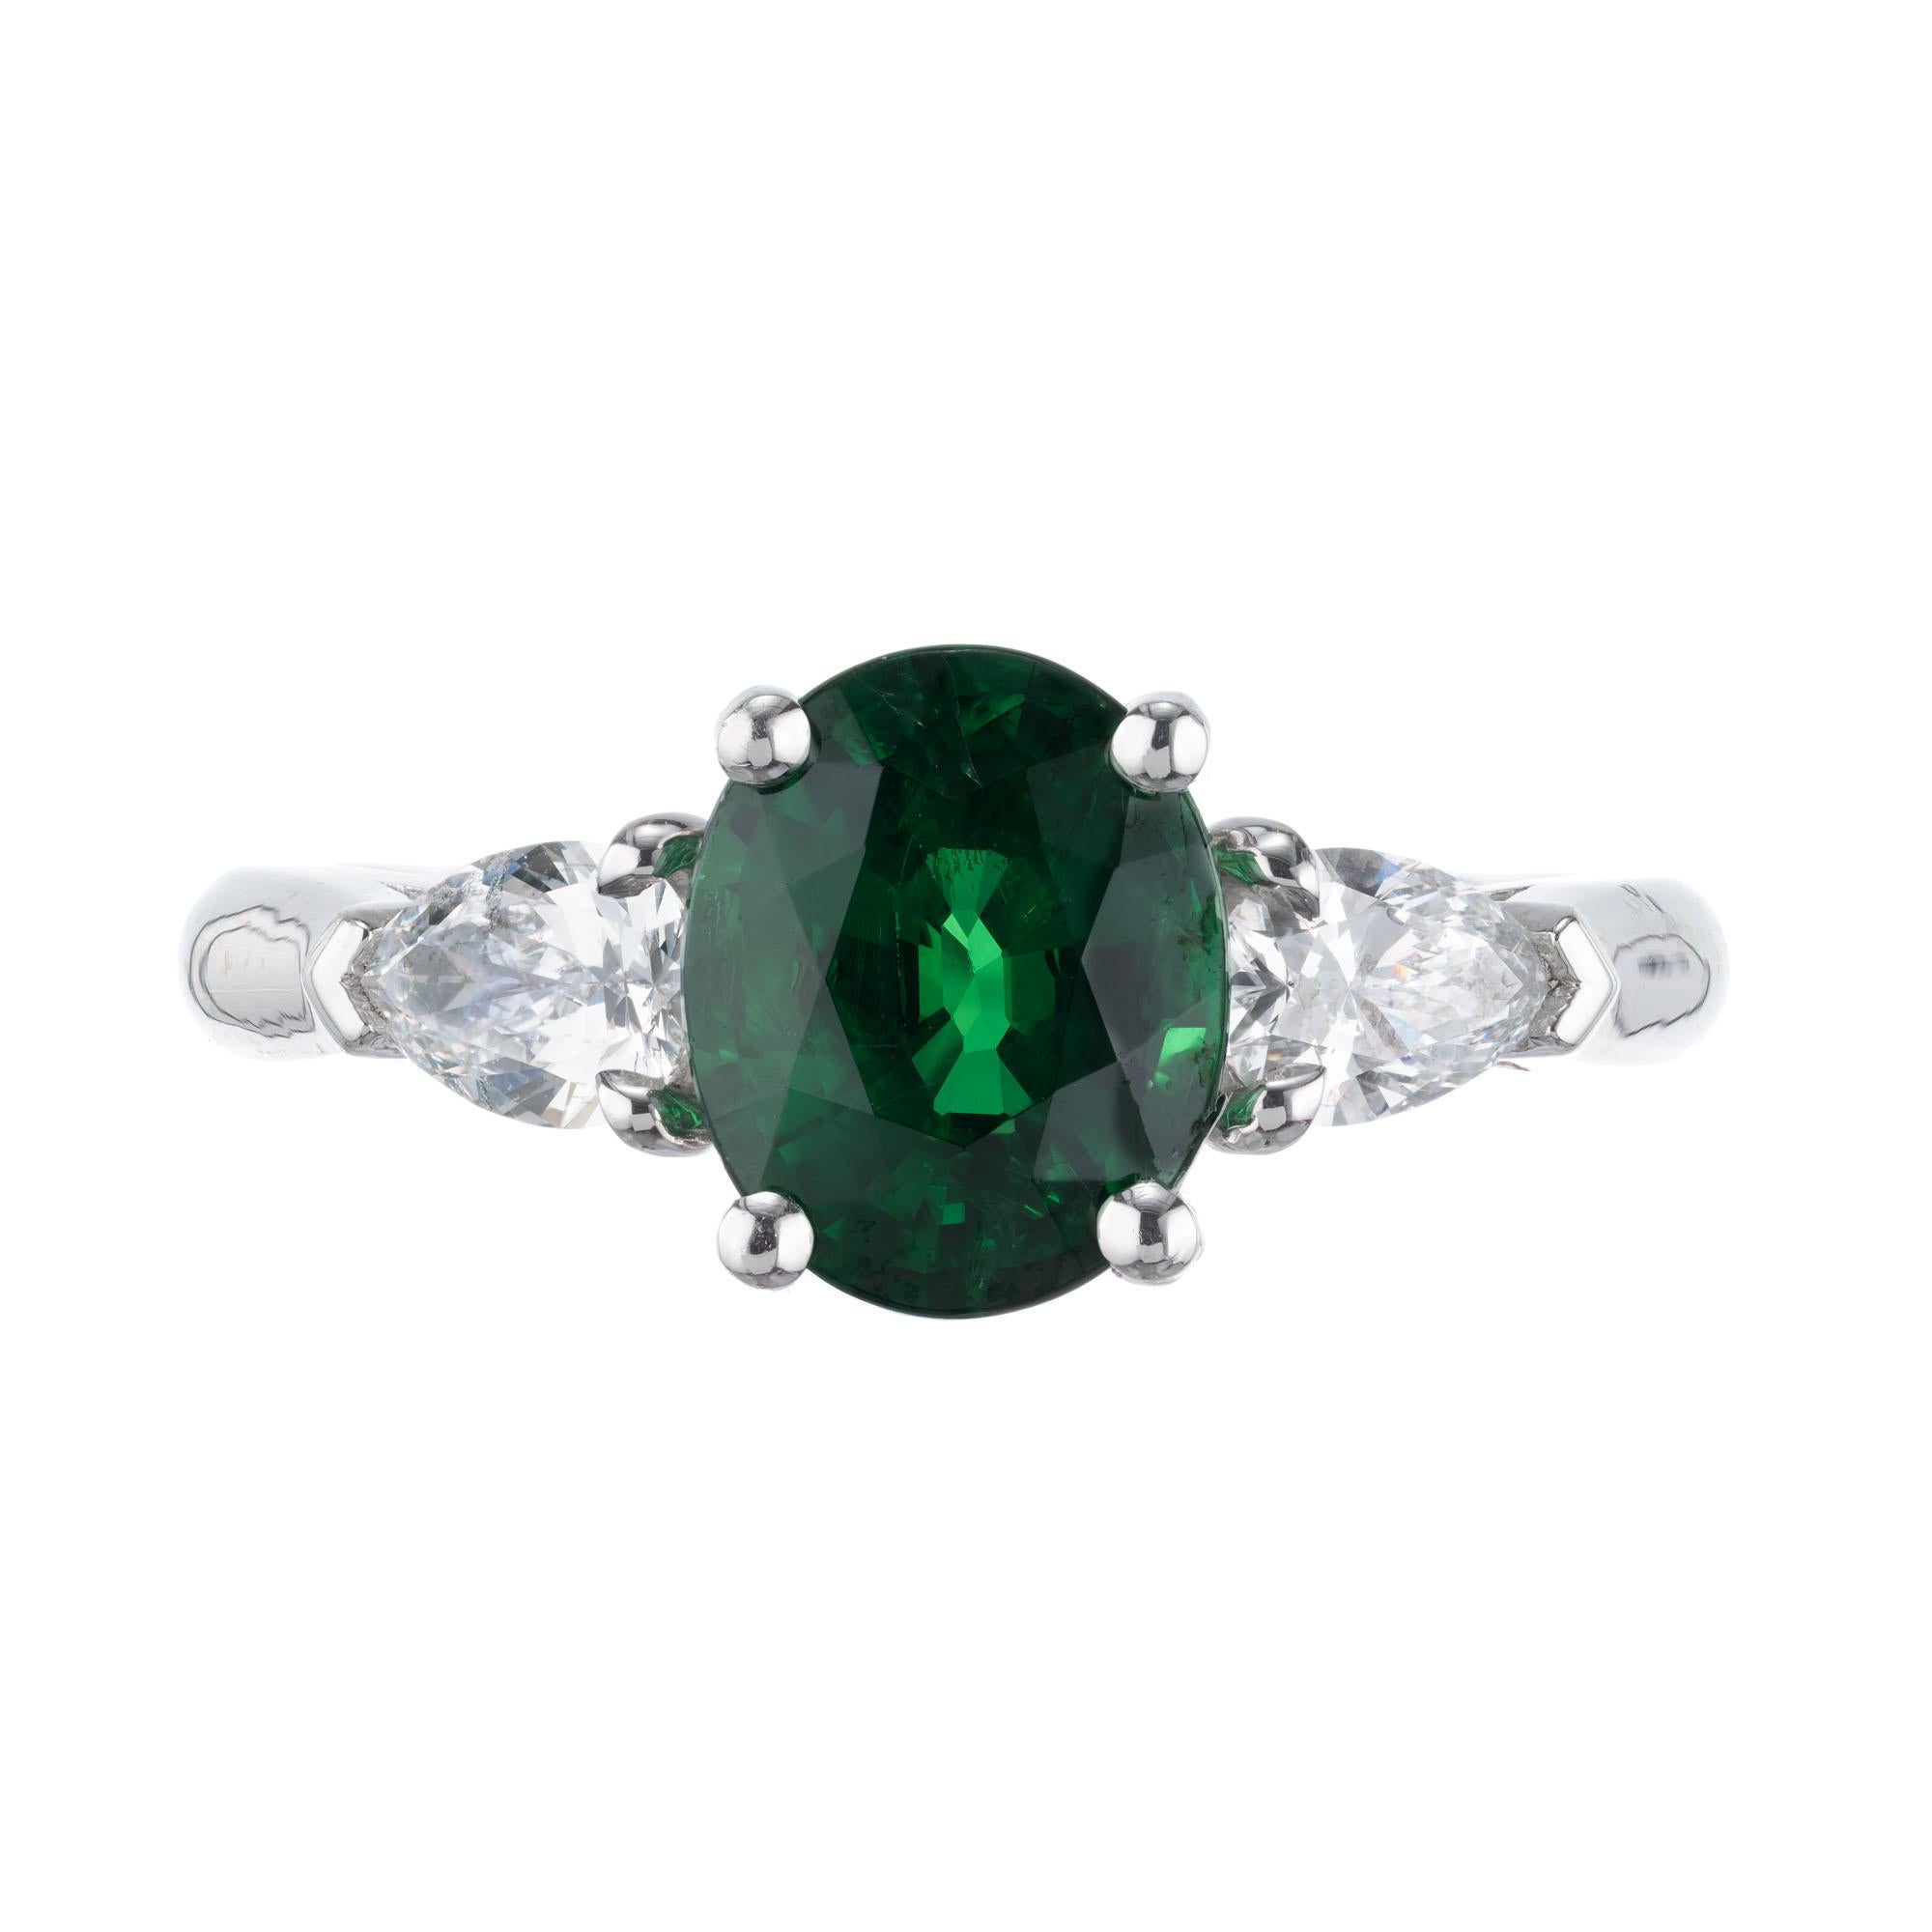 Green Tsavorite Garnet and diamond three-stone engagement ring. 2.30ct oval center stone with two pear shaped side diamonds in a platinum setting. Created in the Peter Suchy Workshop. GIA Certified. 

1 oval bright green Garnet, approx. total weight